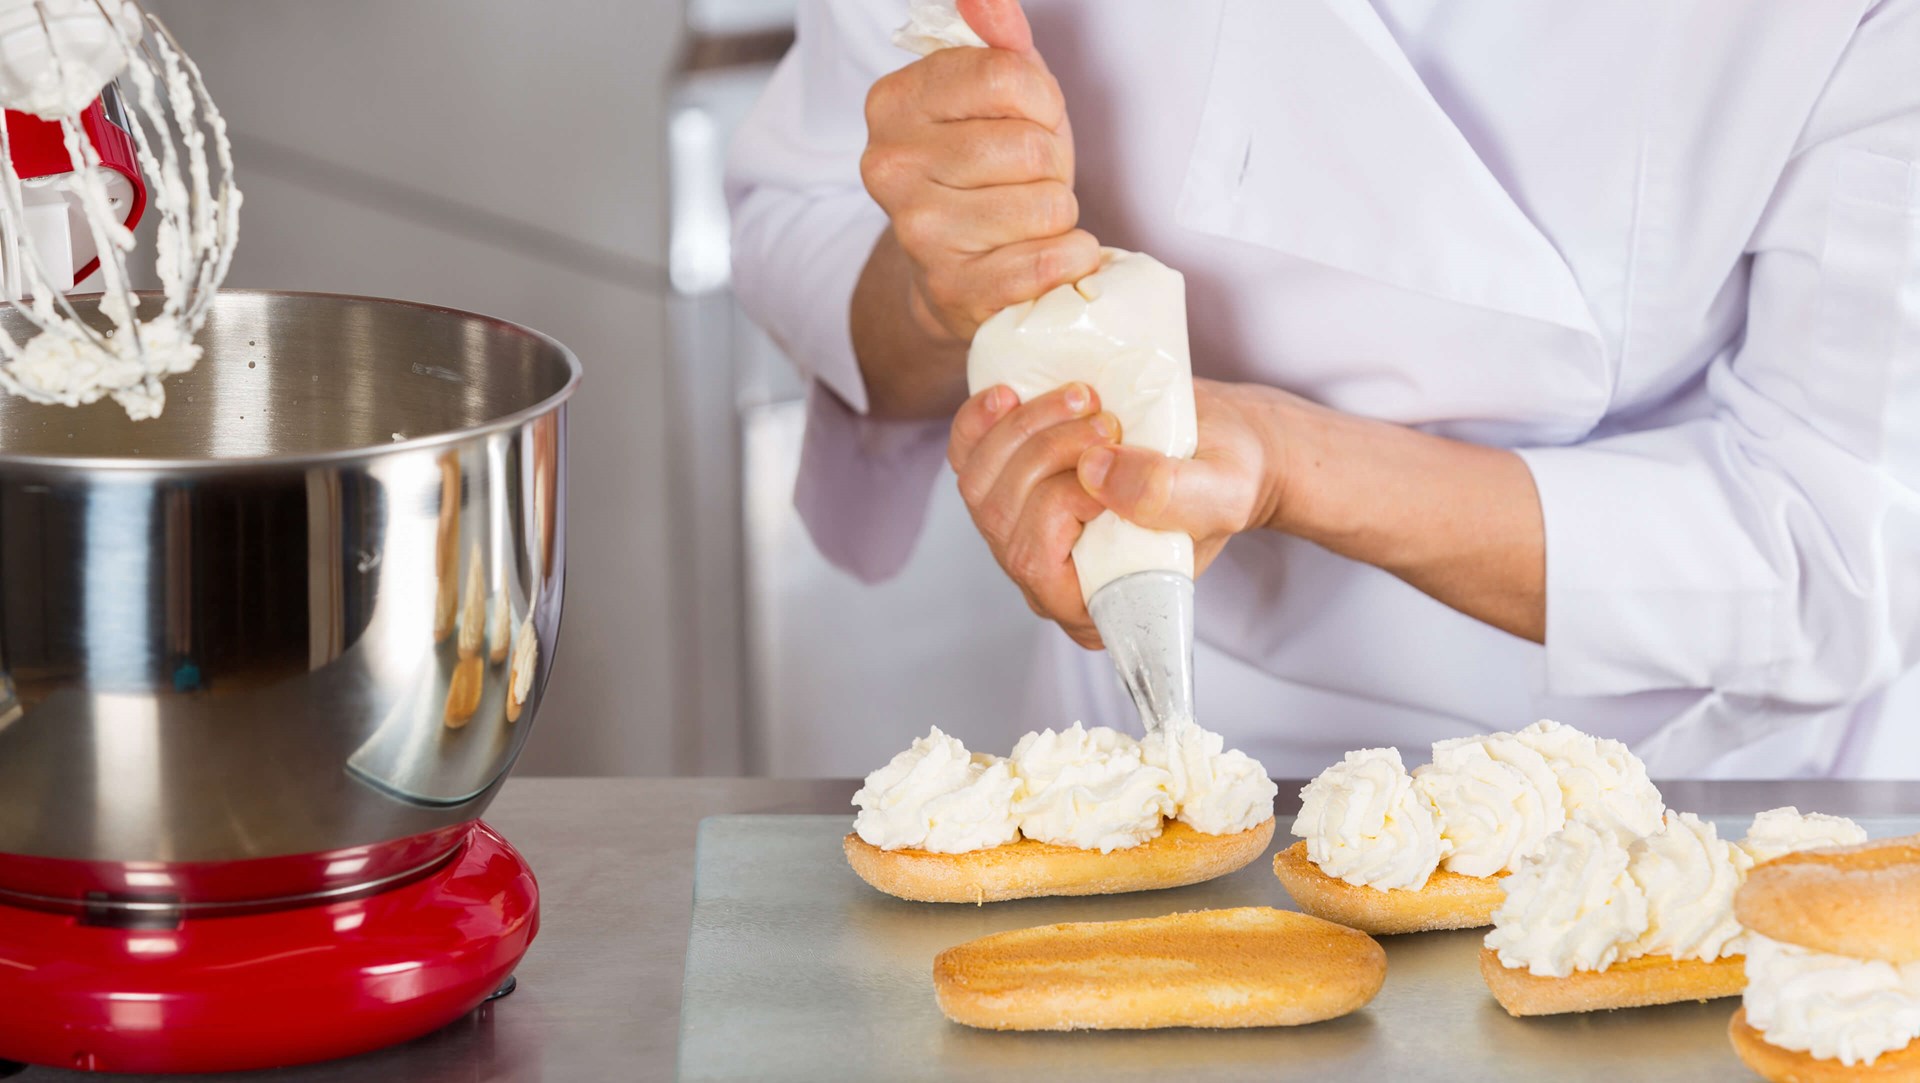 9 Facts About The ‘Secret’ Ingredient In Dairy Free Whipping Creams